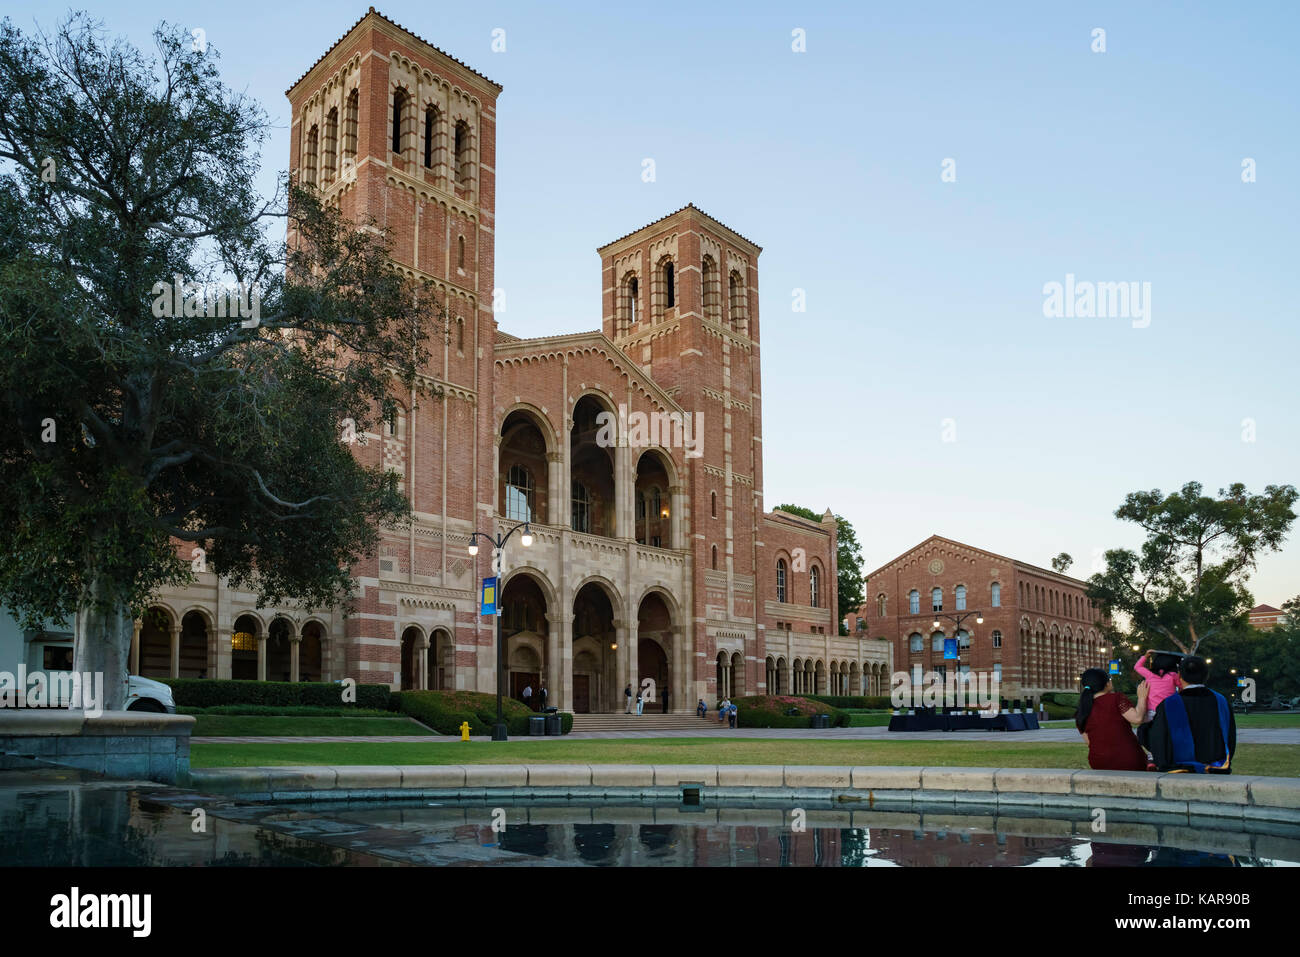 Westwood, JUN 21: Royce Hall of UCLA on JUN 21, 2017 at Westwood, Los Angeles County, California, United States Stock Photo